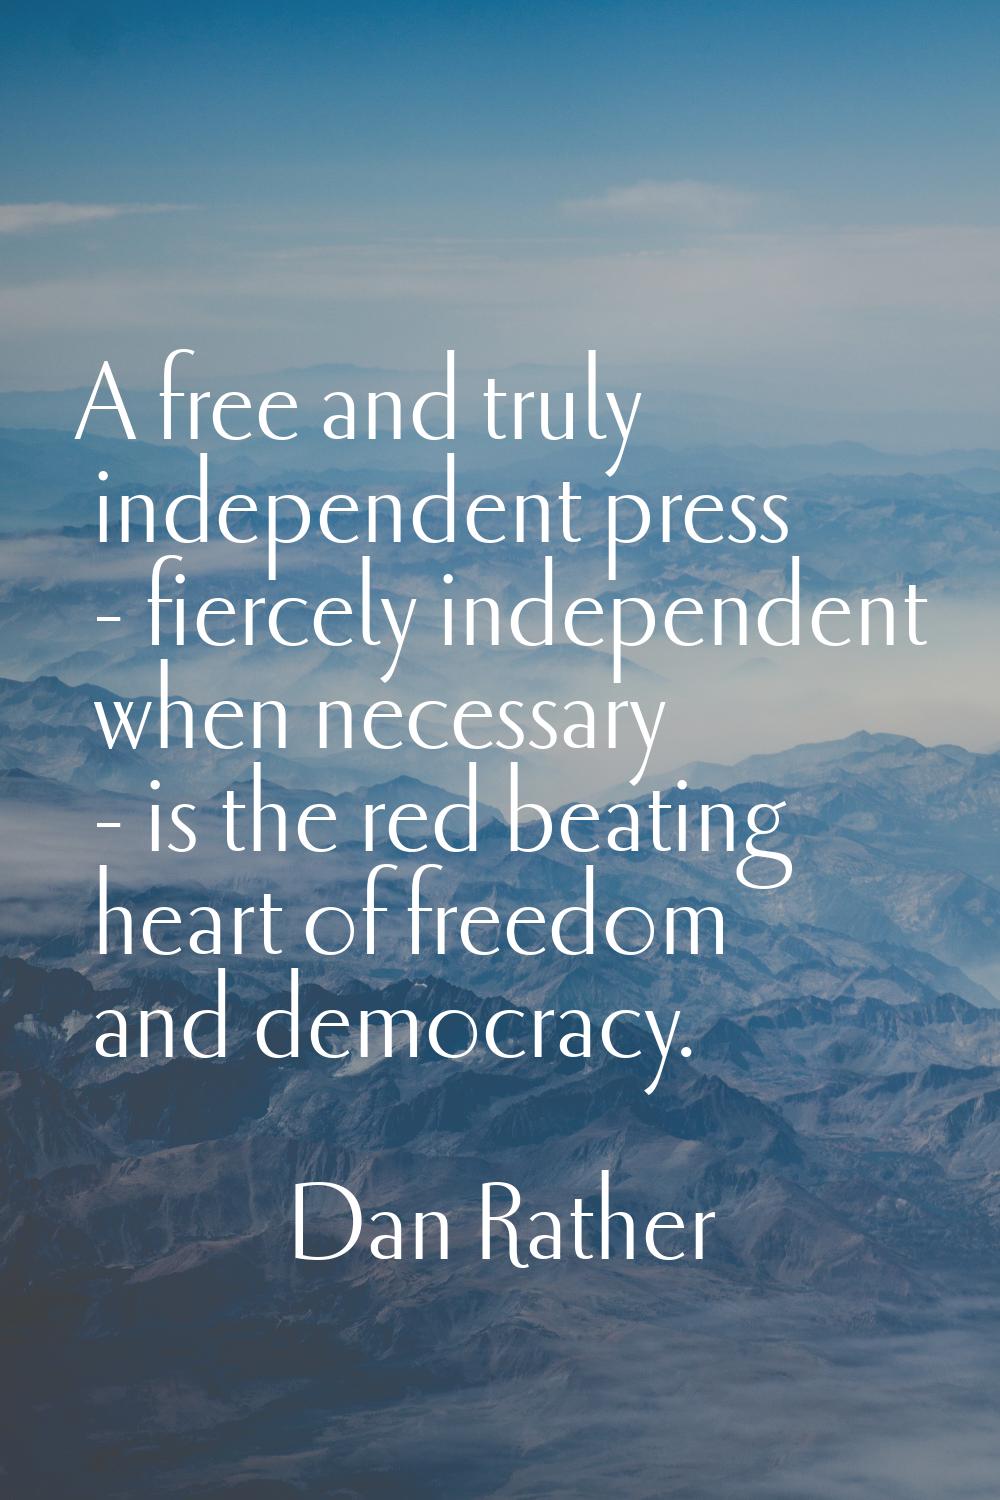 A free and truly independent press - fiercely independent when necessary - is the red beating heart